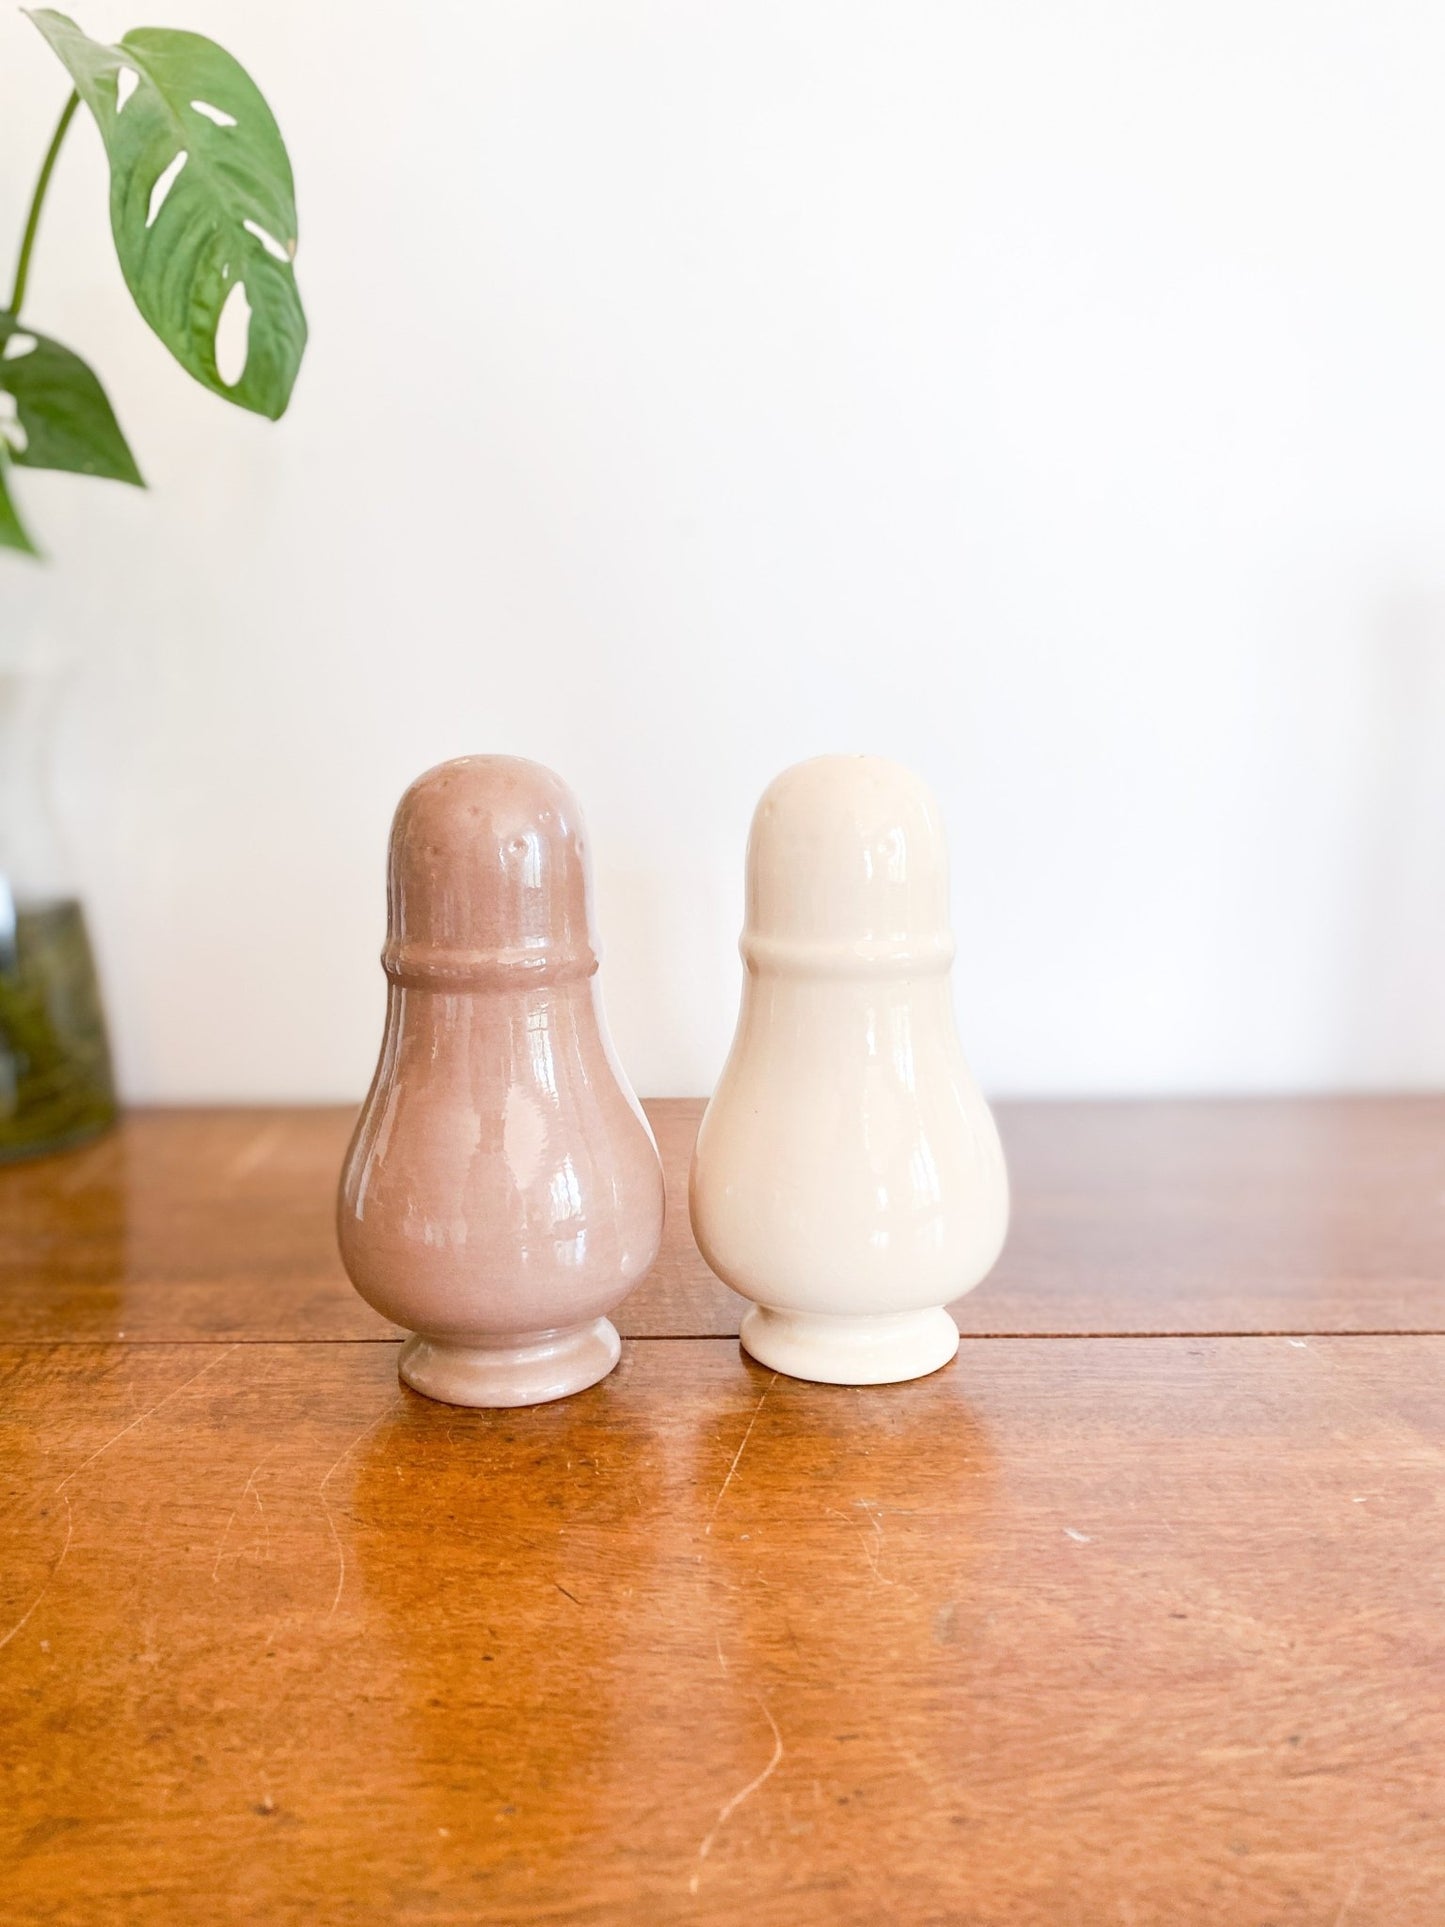 Muted Tones Salt and Pepper Shaker - Perth Market